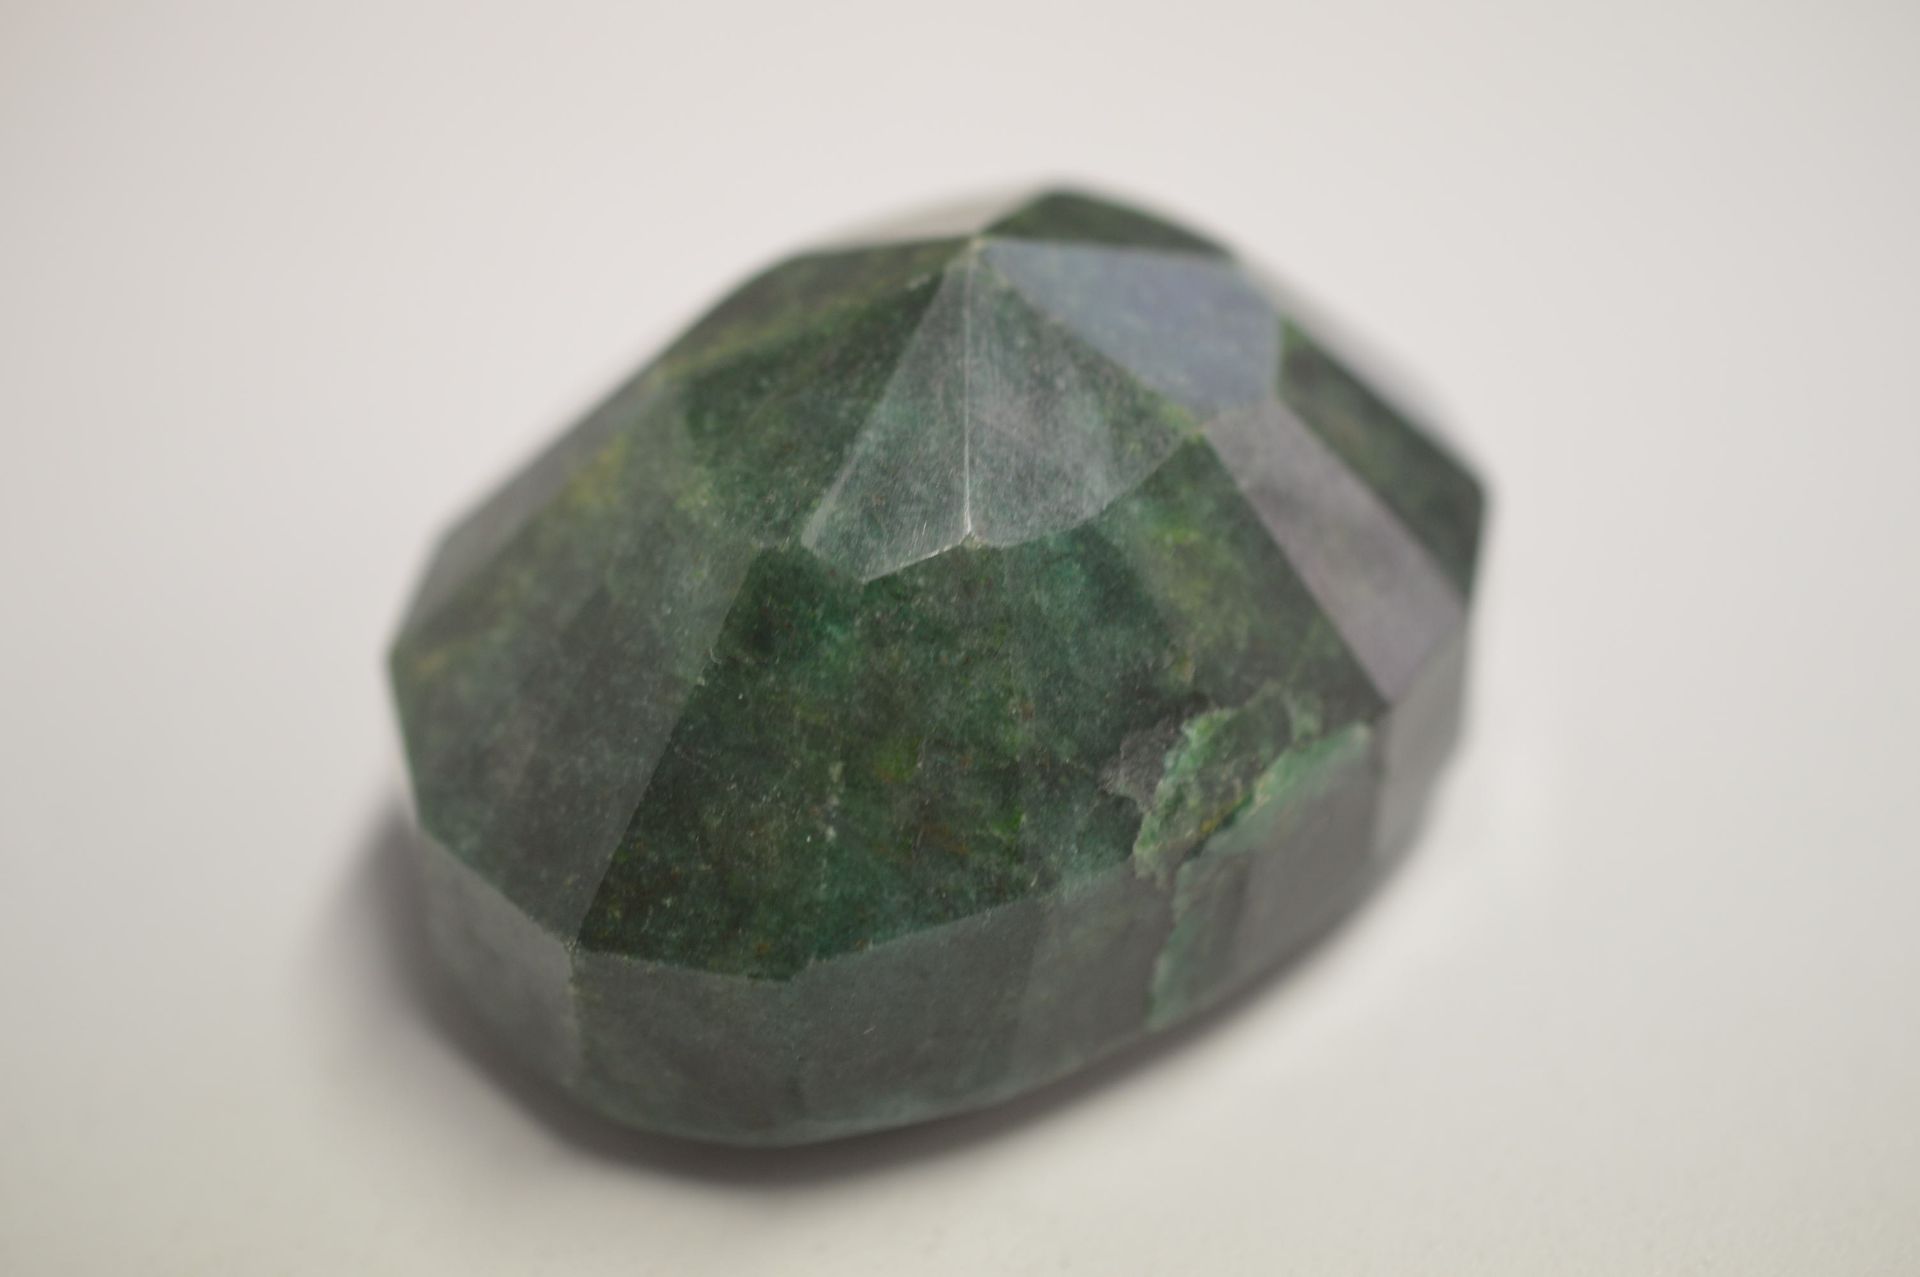 740 CARAT OVAL SHAPED GREEN NATURAL EMERALD - Image 2 of 4